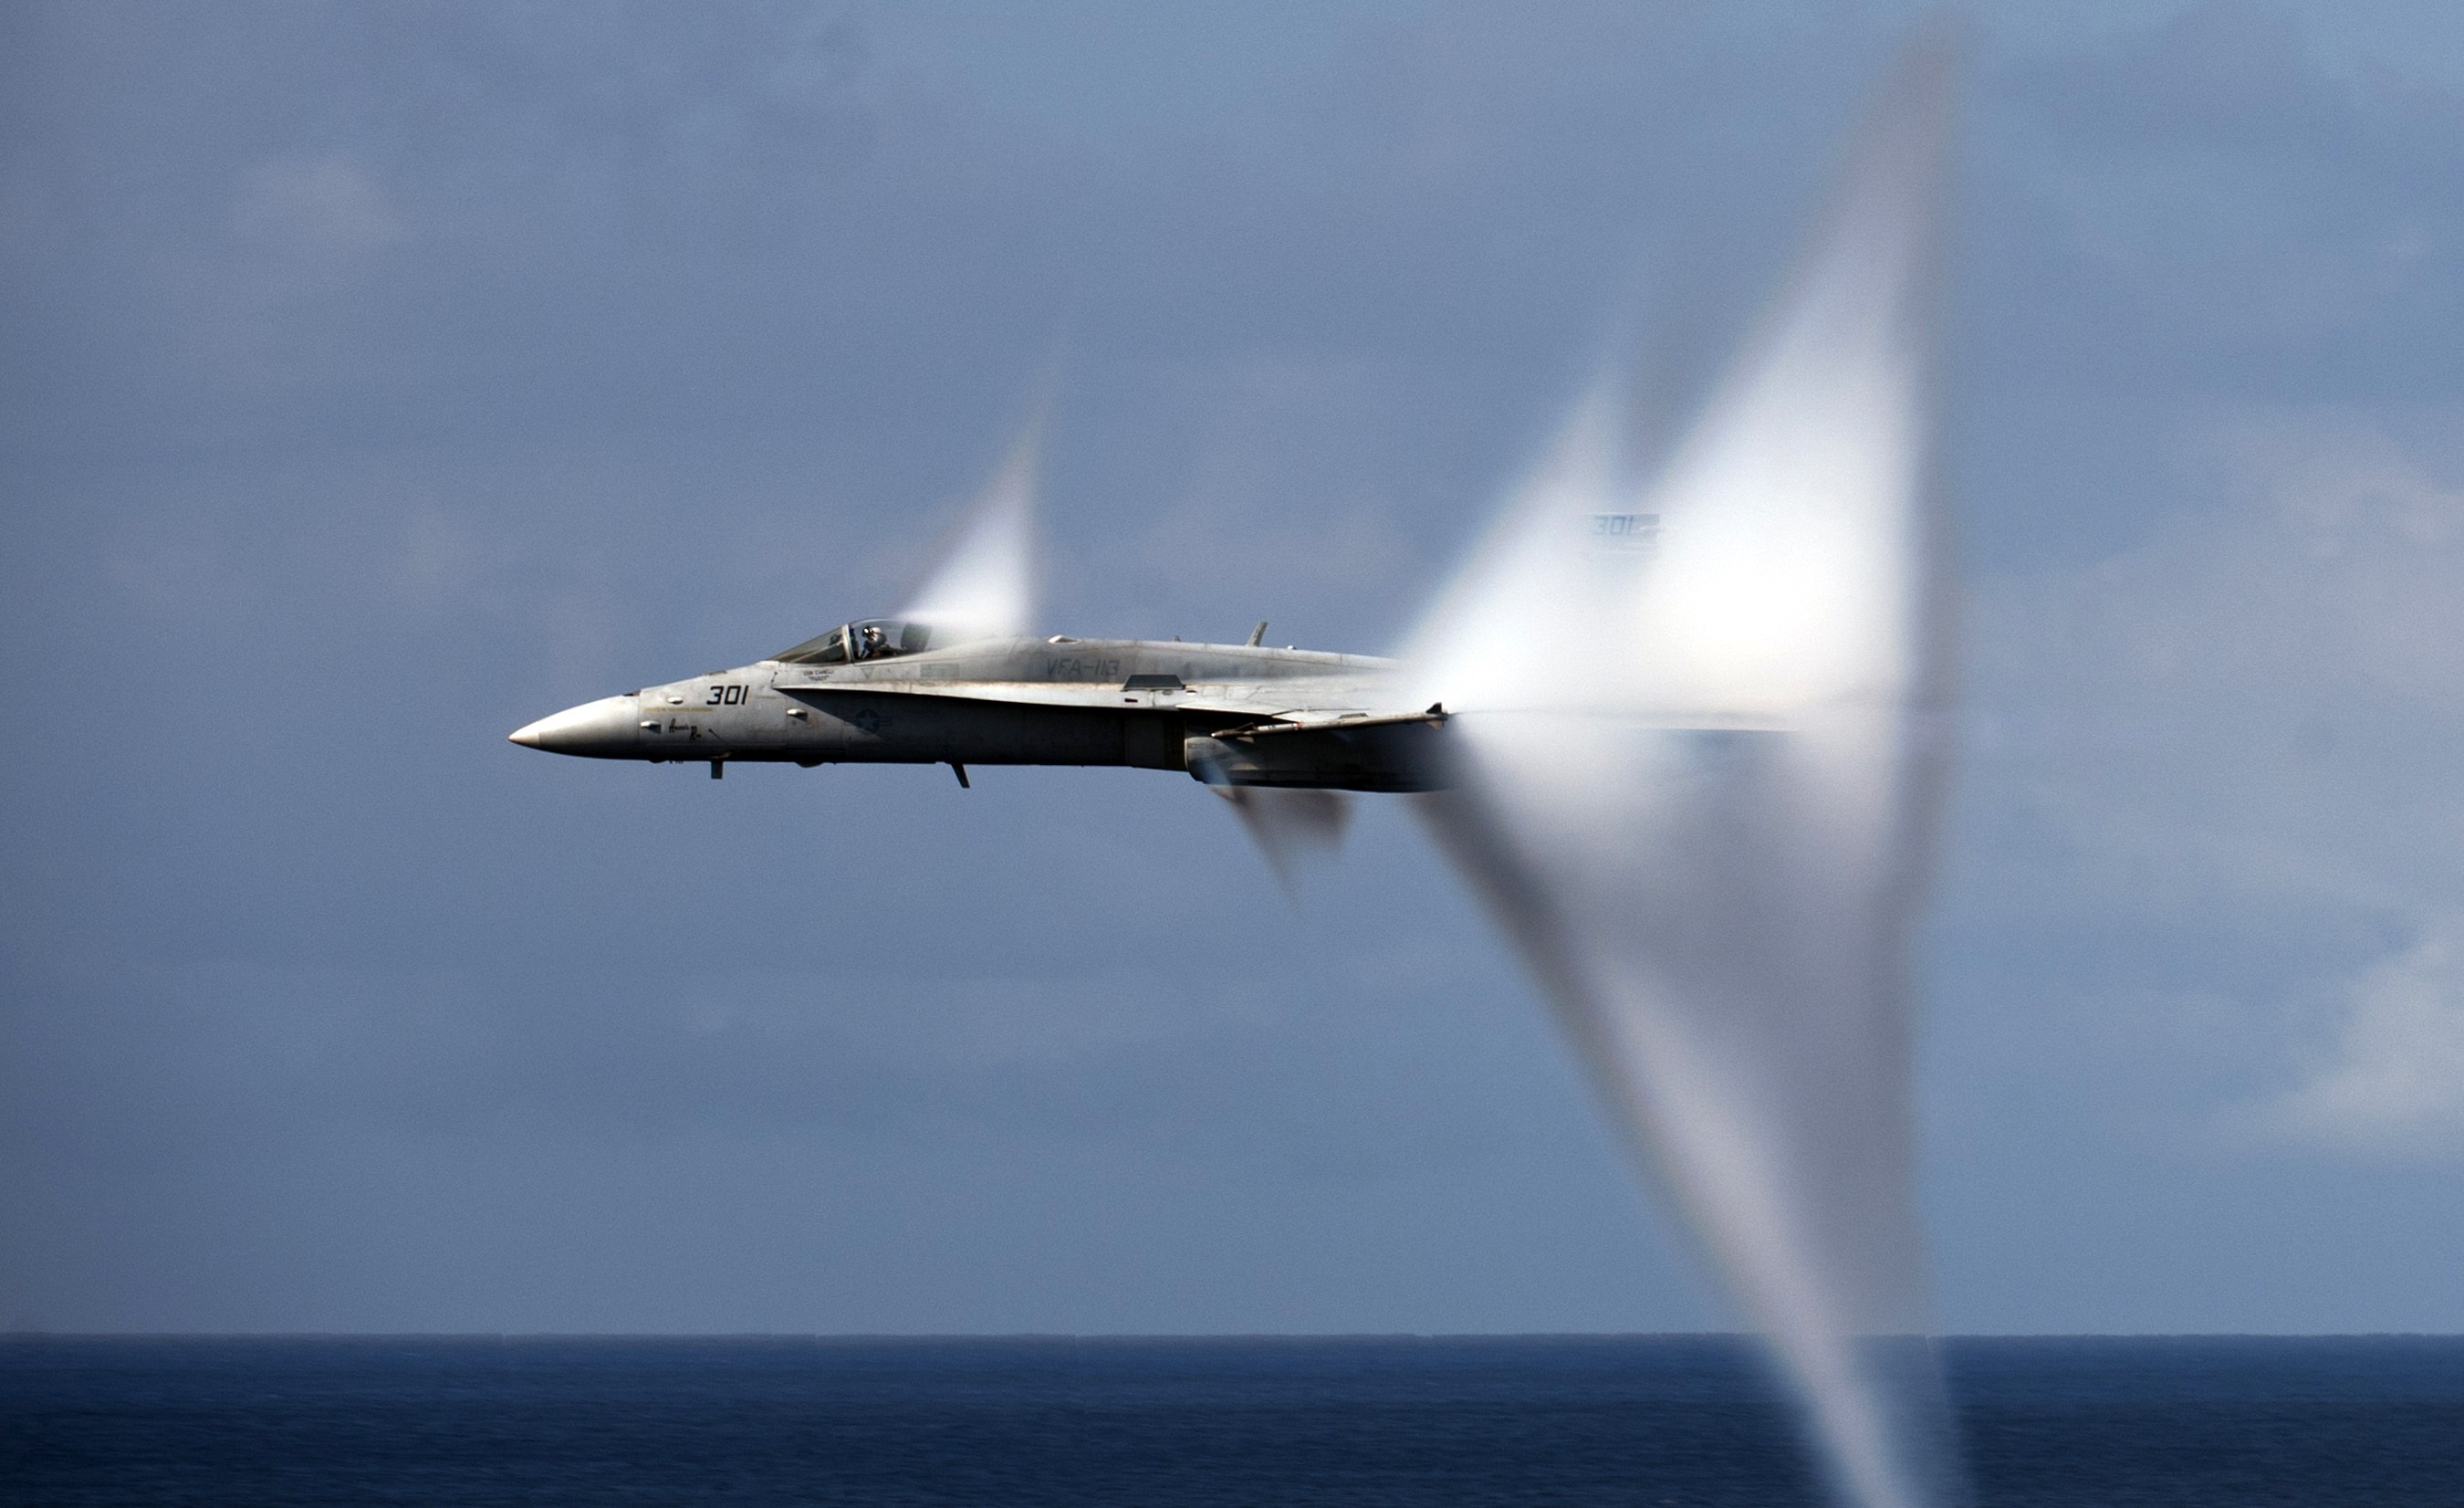 General 2700x1652 aircraft military sonic booms McDonnell Douglas F/A-18 Hornet vehicle numbers military vehicle military aircraft United States Navy jet fighter supersonic McDonnell Douglas American aircraft